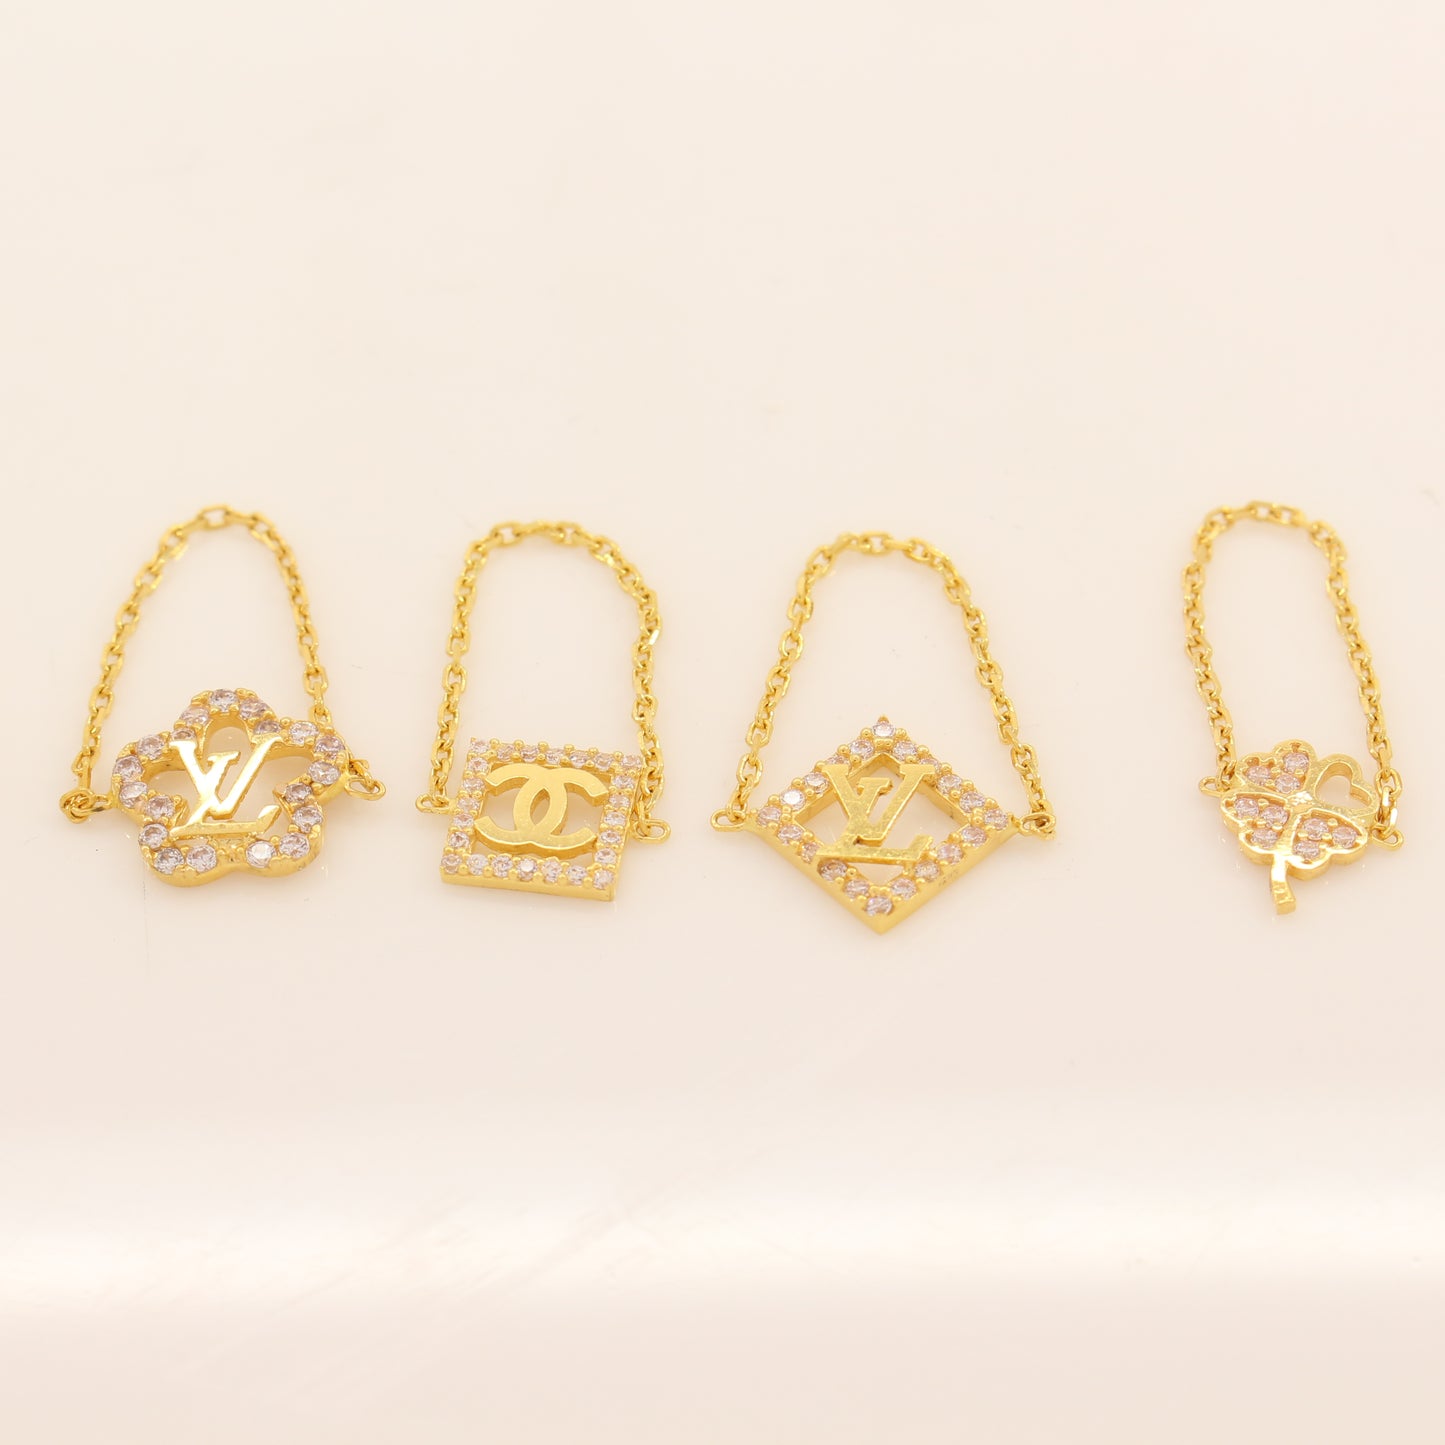 21K Gold Chain Rings Size 6